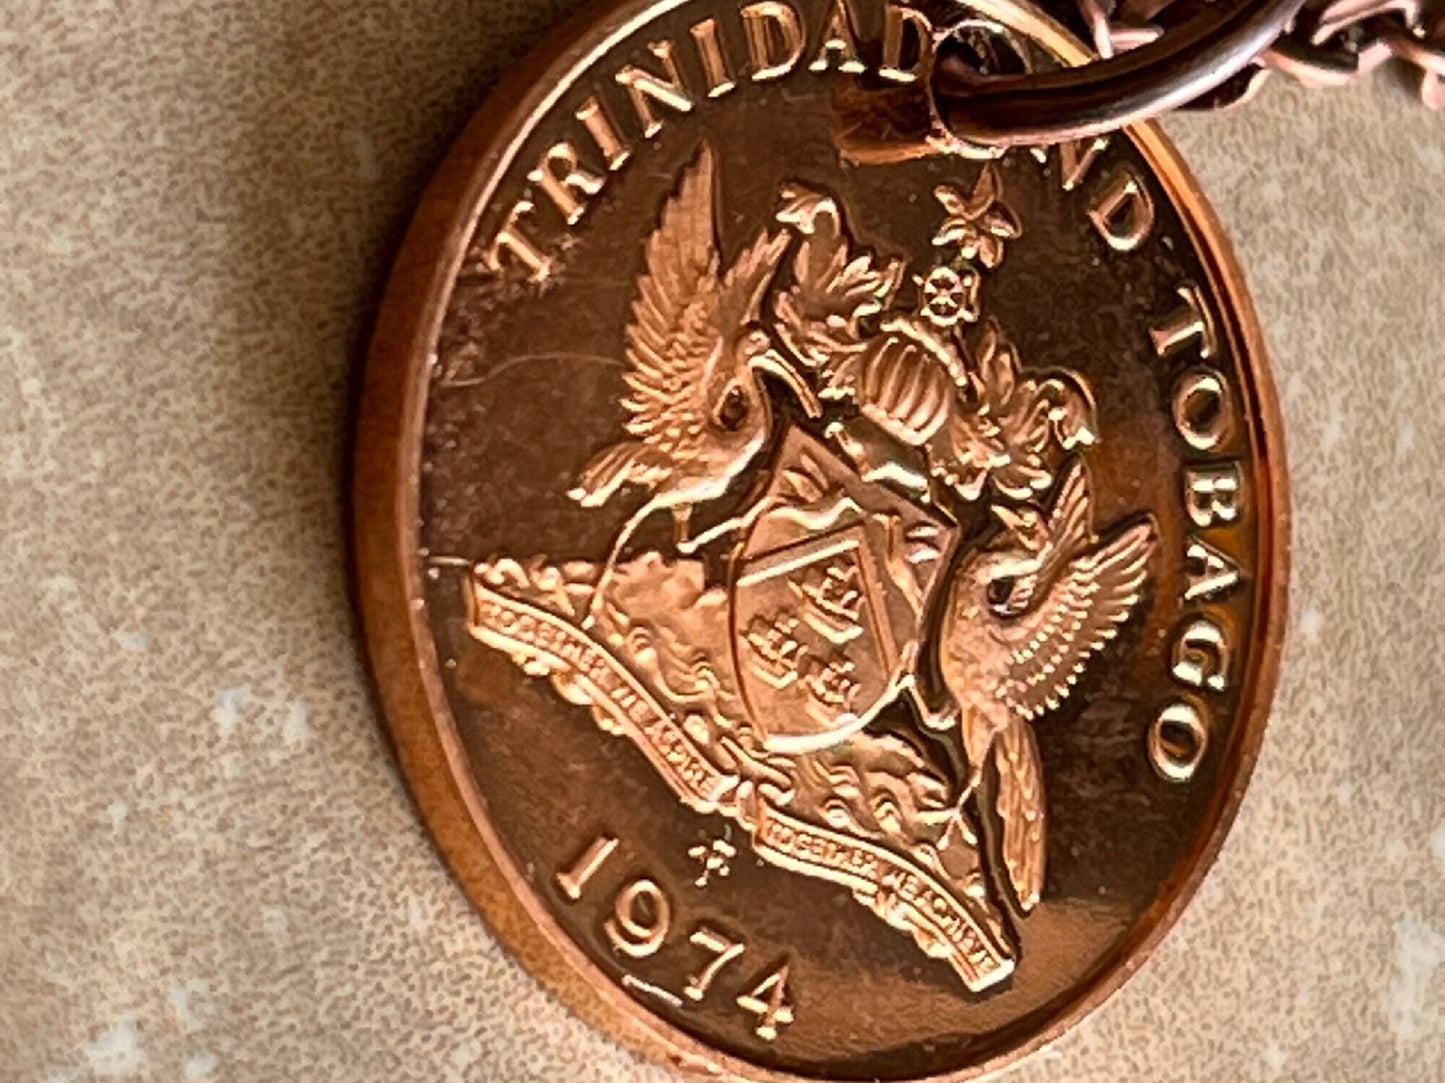 Trinidad and Tobago Coin Necklace From A Mint Set, 5 Cents Pendant Vintage Custom Made Rare Coins Coin Enthusiast Fashion Accessory Handmade